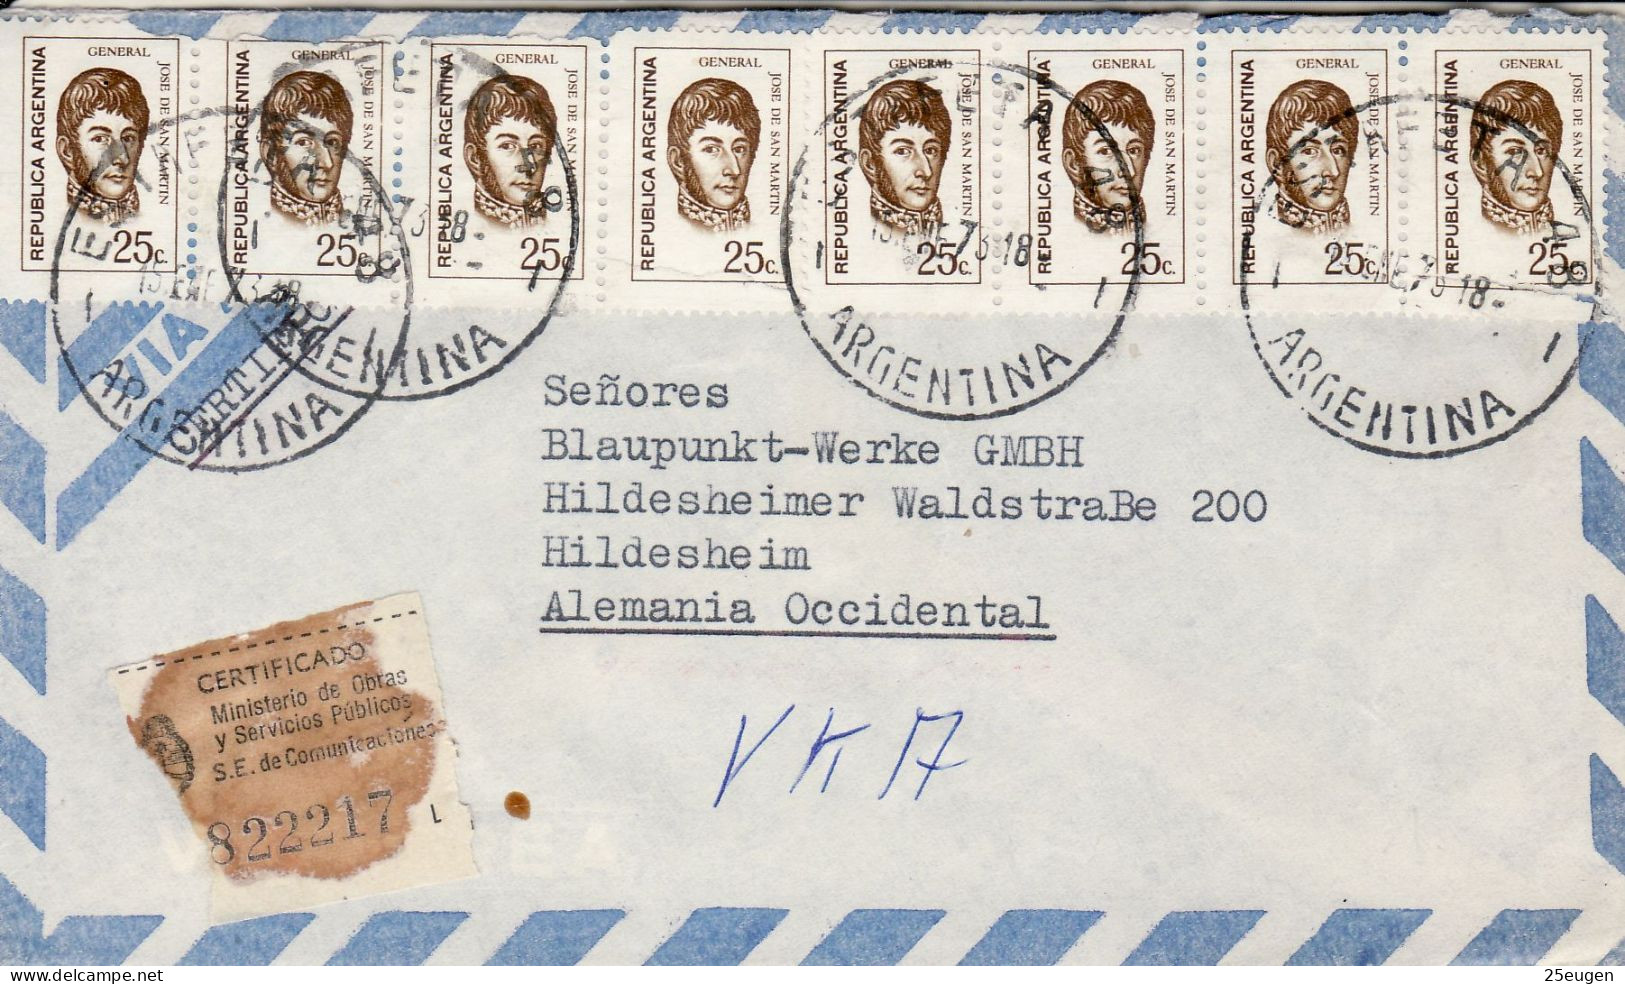 ARGENTINA 1973  AIRMAIL LETTER SENT FROM BUENOS AIRES TO HILDESHEIM - Covers & Documents